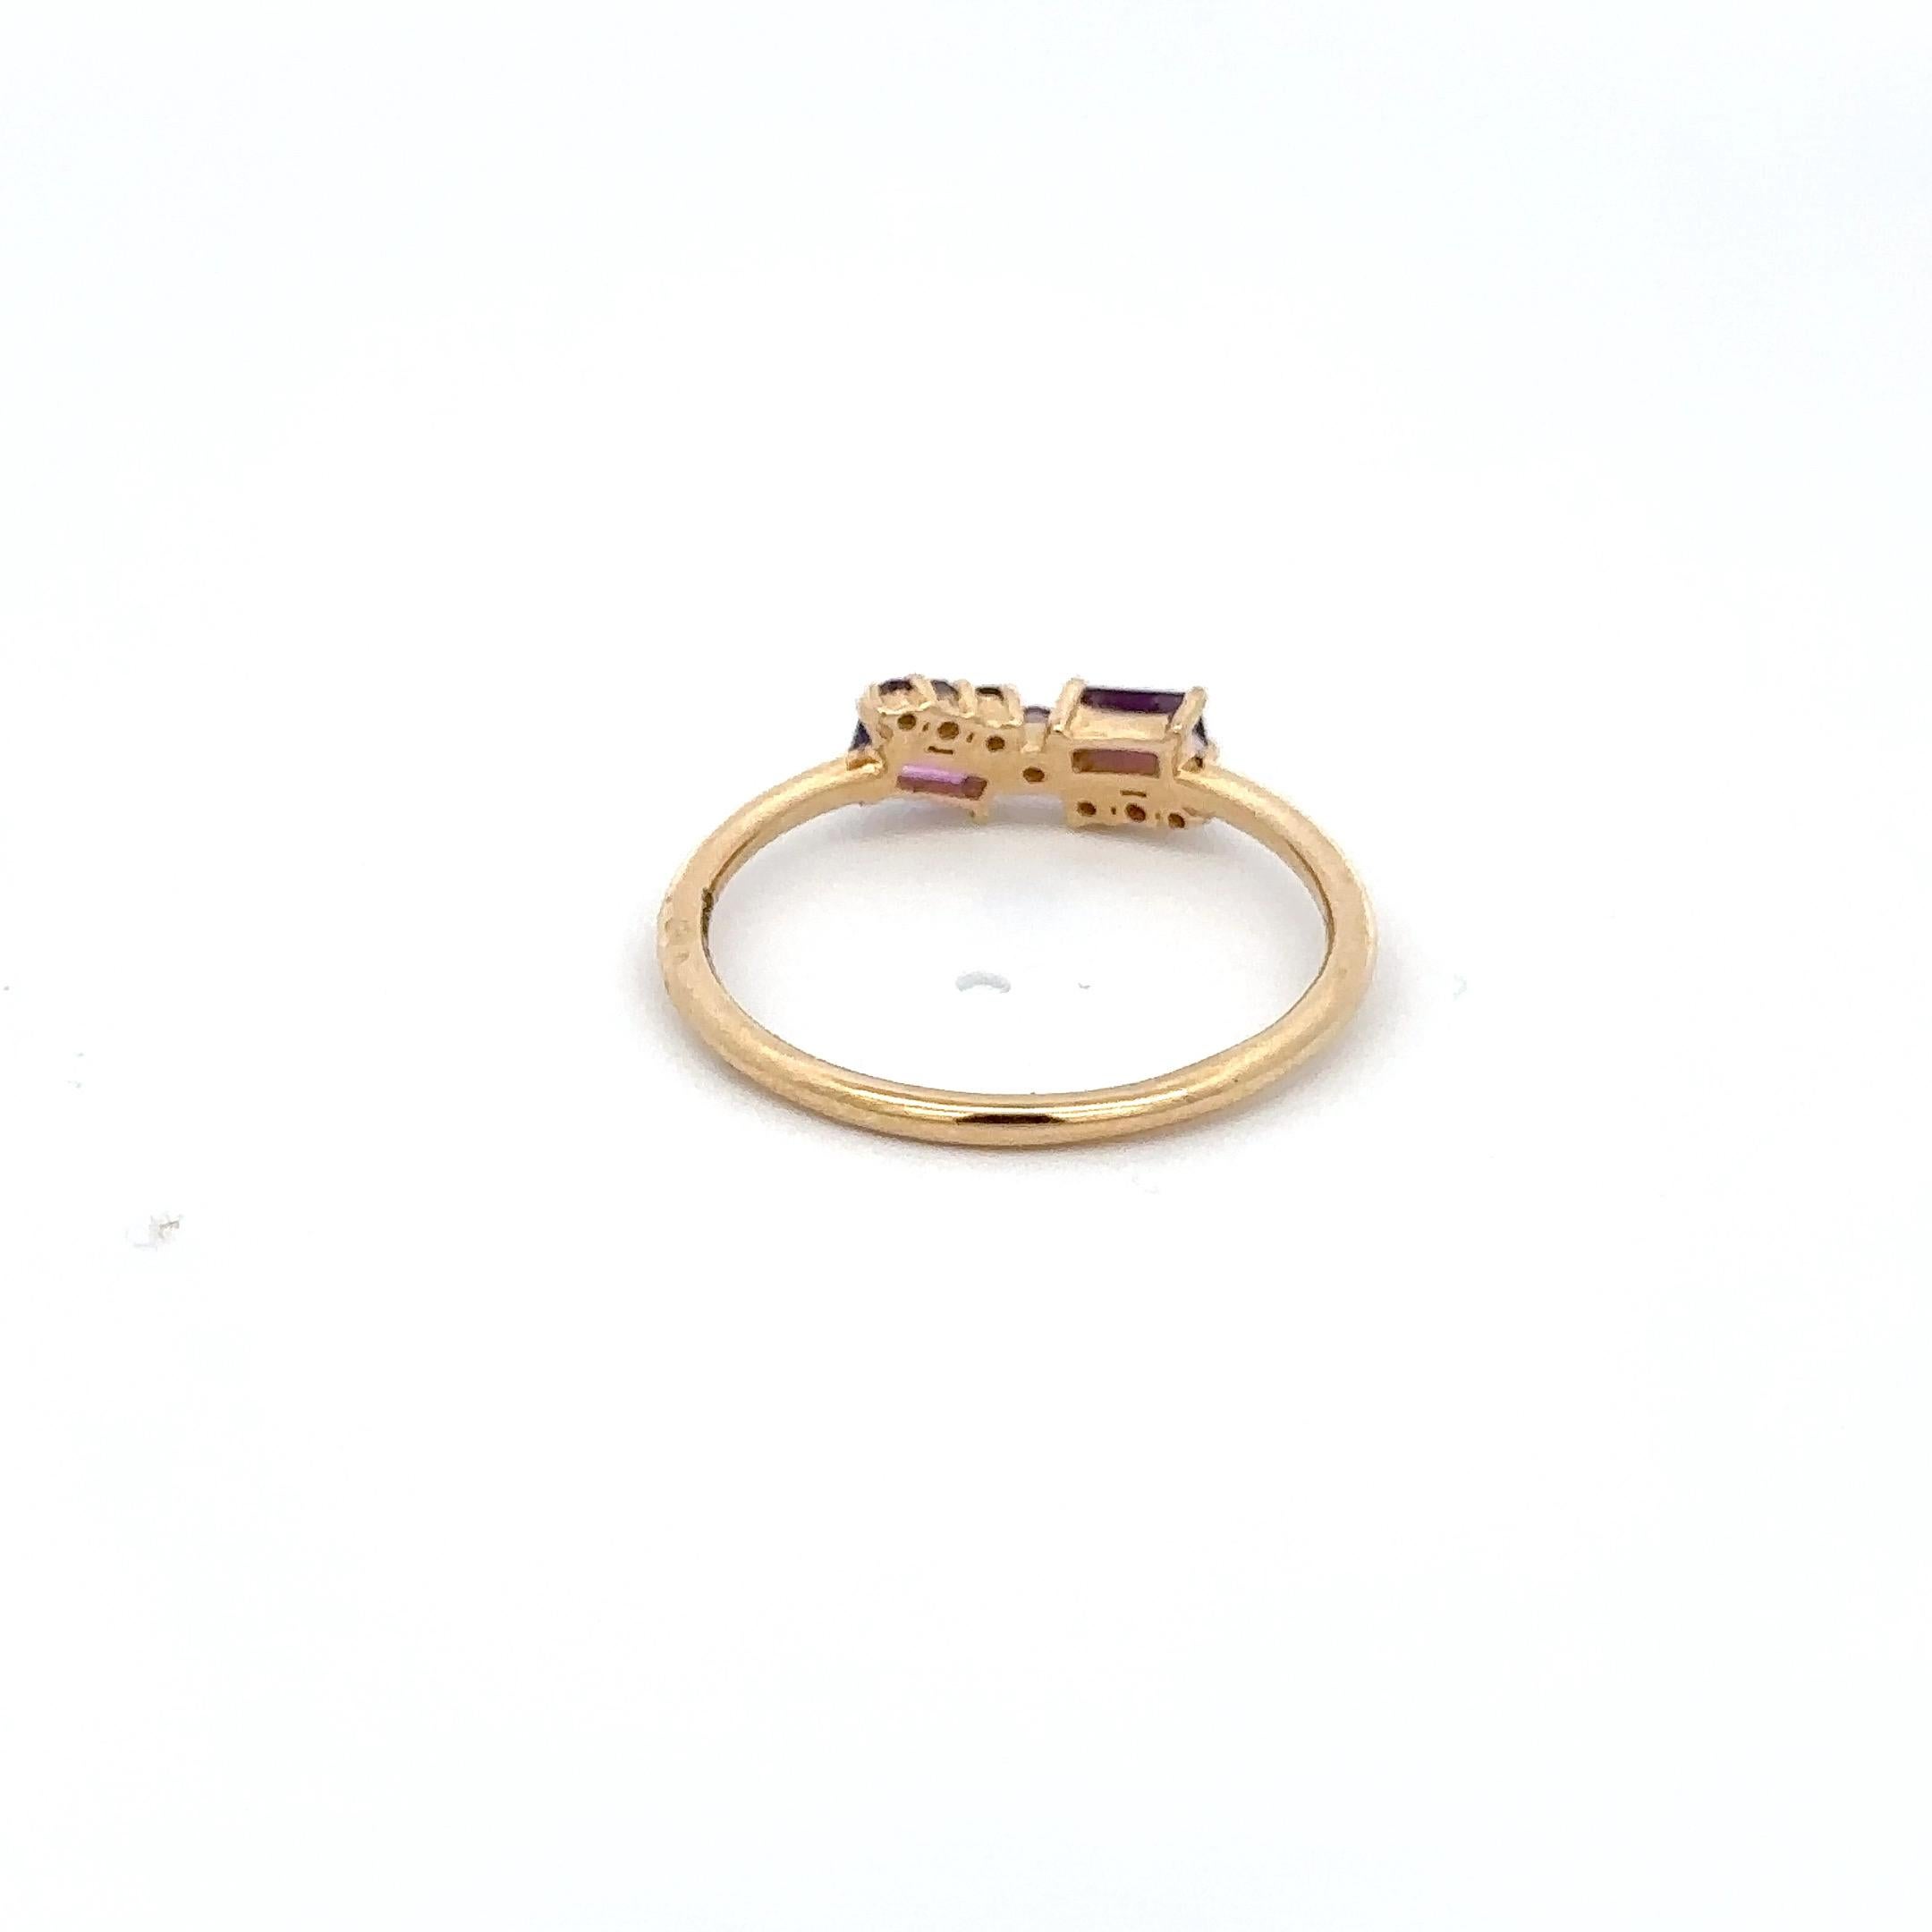 For Sale:  Everyday Wear Asymmetrical Amethyst Ring For Her in 14k Solid Yellow Gold 9